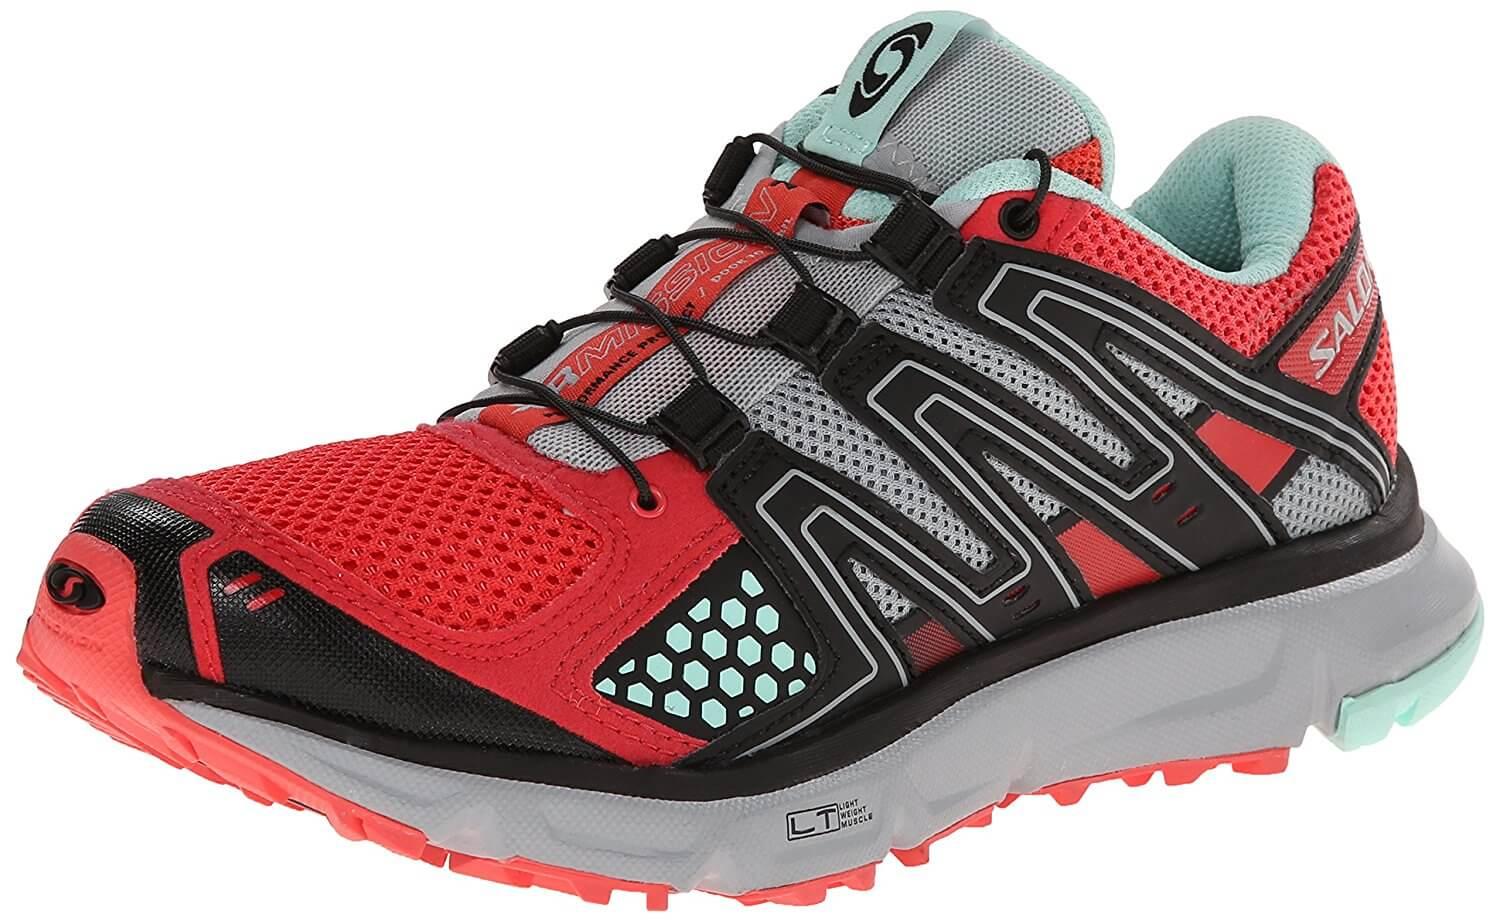 A three quarter view of the Salomon XR Mission trail running shoe